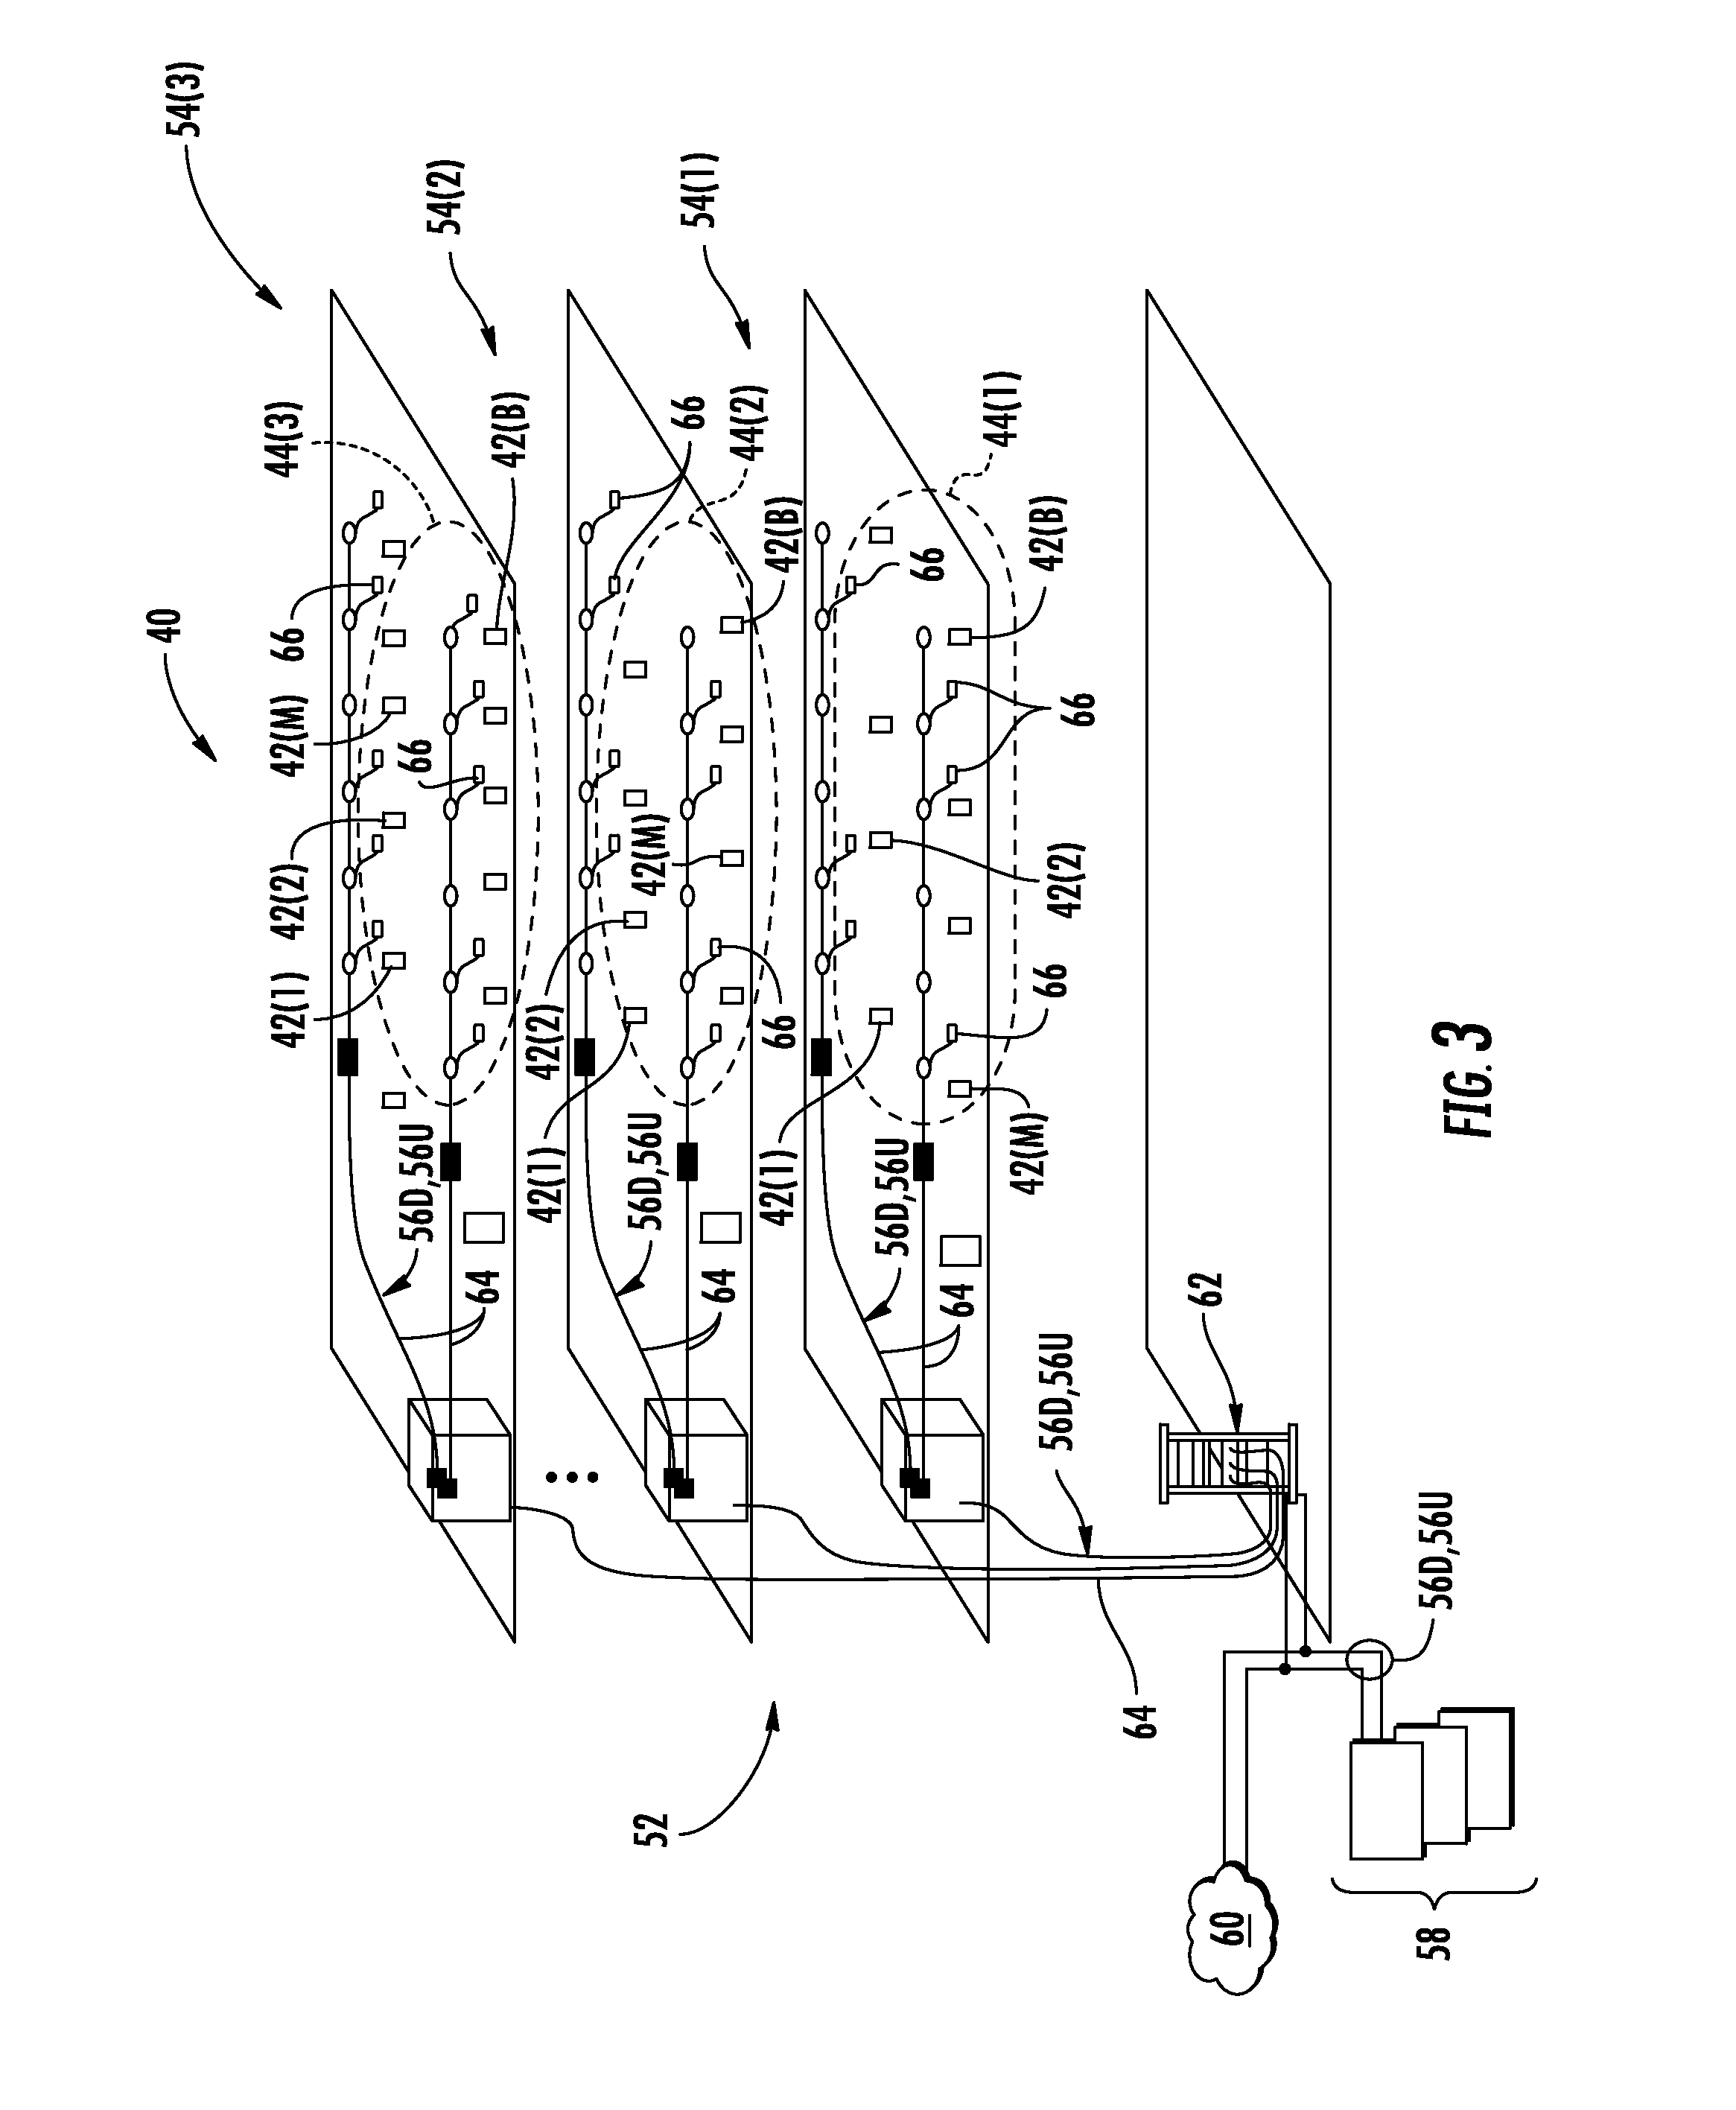 Ultrasound-based localization of client devices with inertial navigation supplement in distributed communication systems and related devices and methods